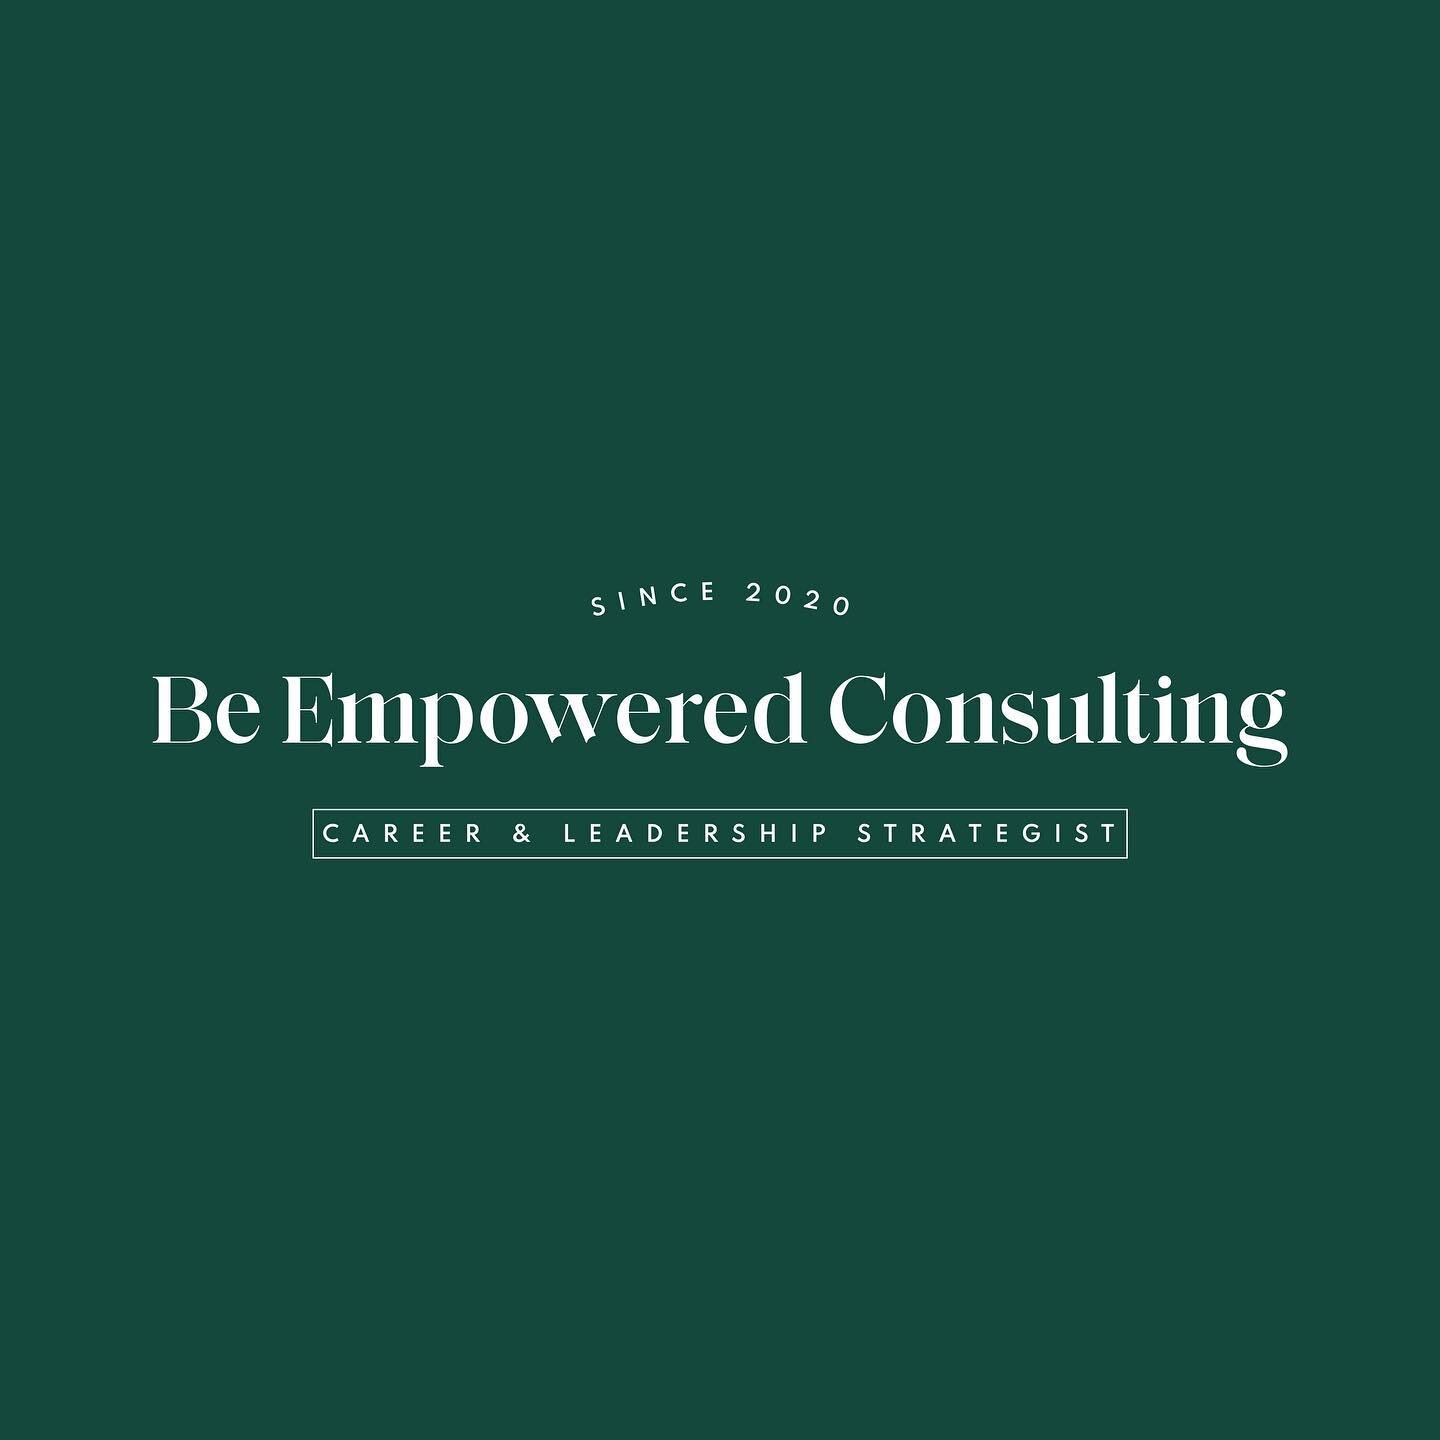 ✨Need support to manifest and elevate your career?! 

Check out Ana Laura from @beempoweredconsulting and her services catered to ambitious BIPOC women. 

Ana Laura purchased a exclusive logo from my logo shop and we worked together to customize it t